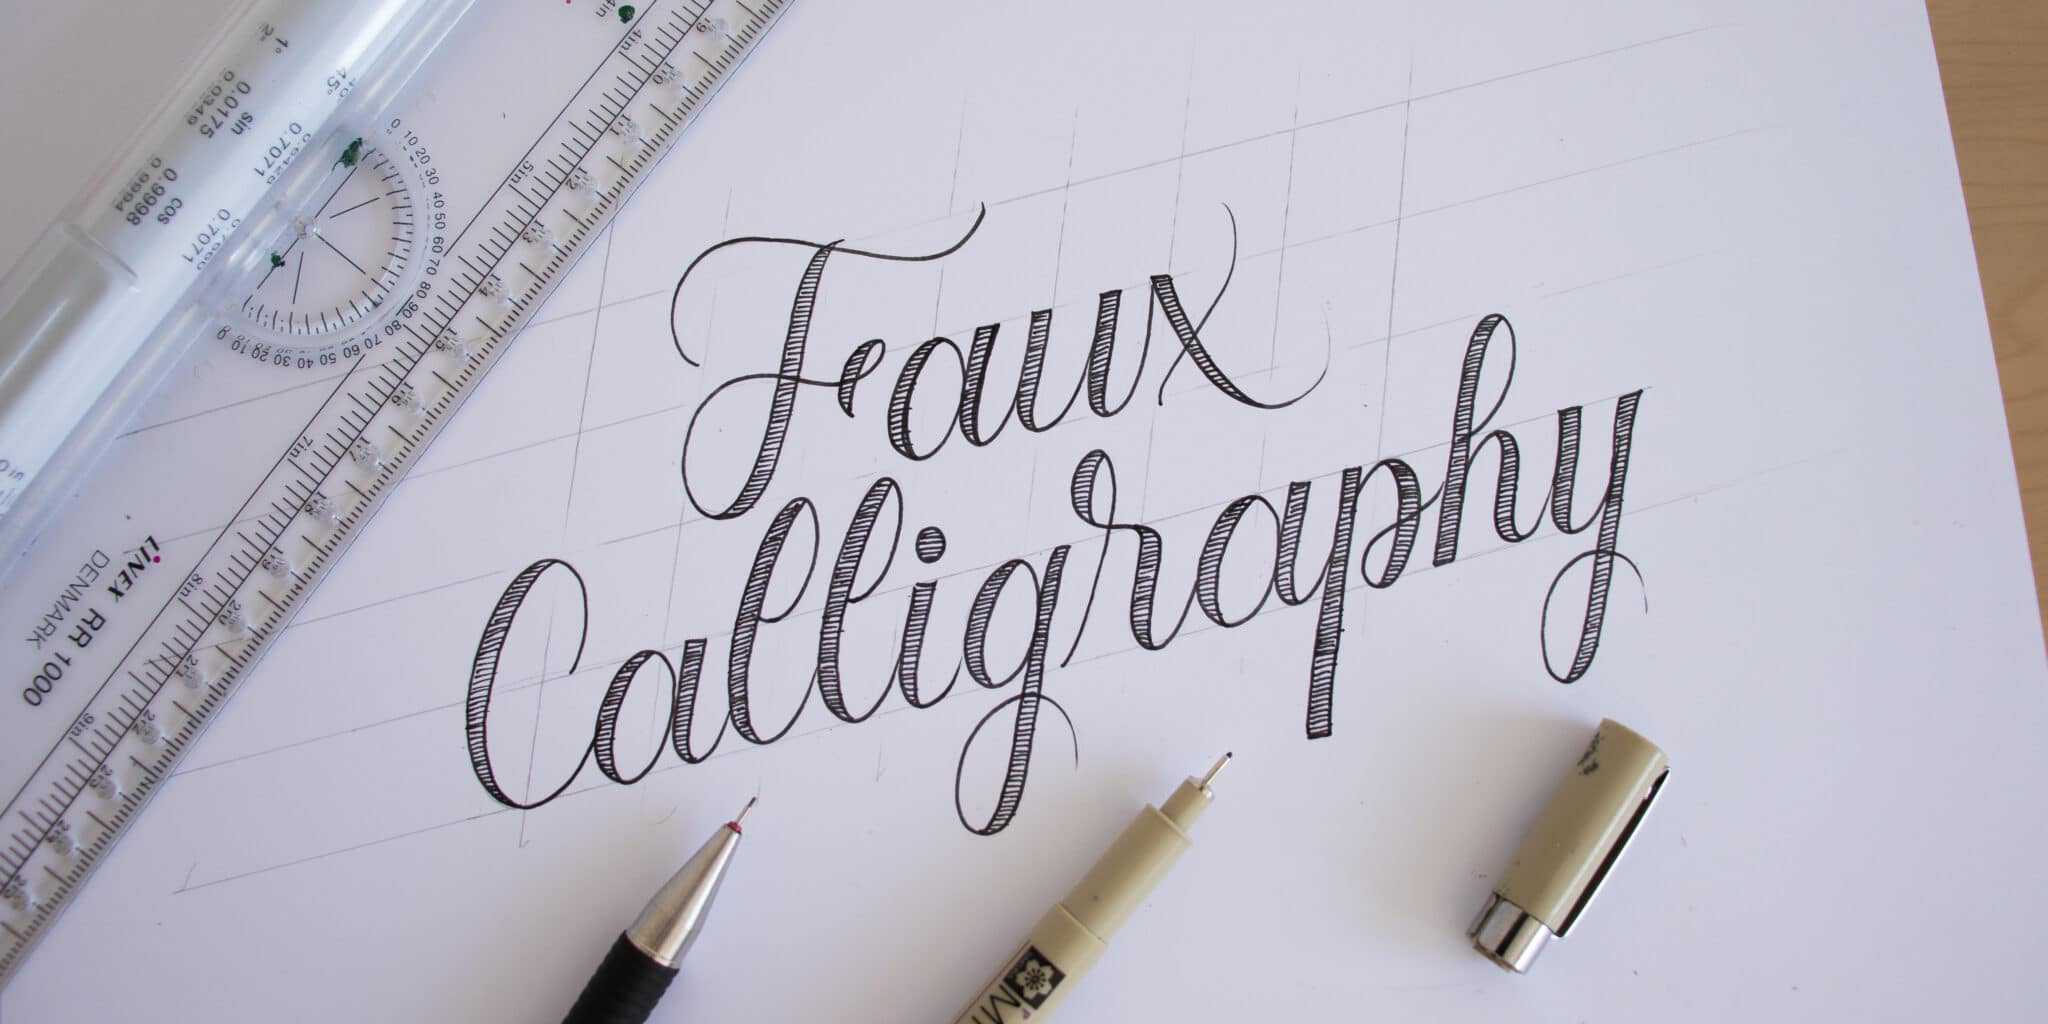 Take a look inside The Guide to Mindful Lettering 